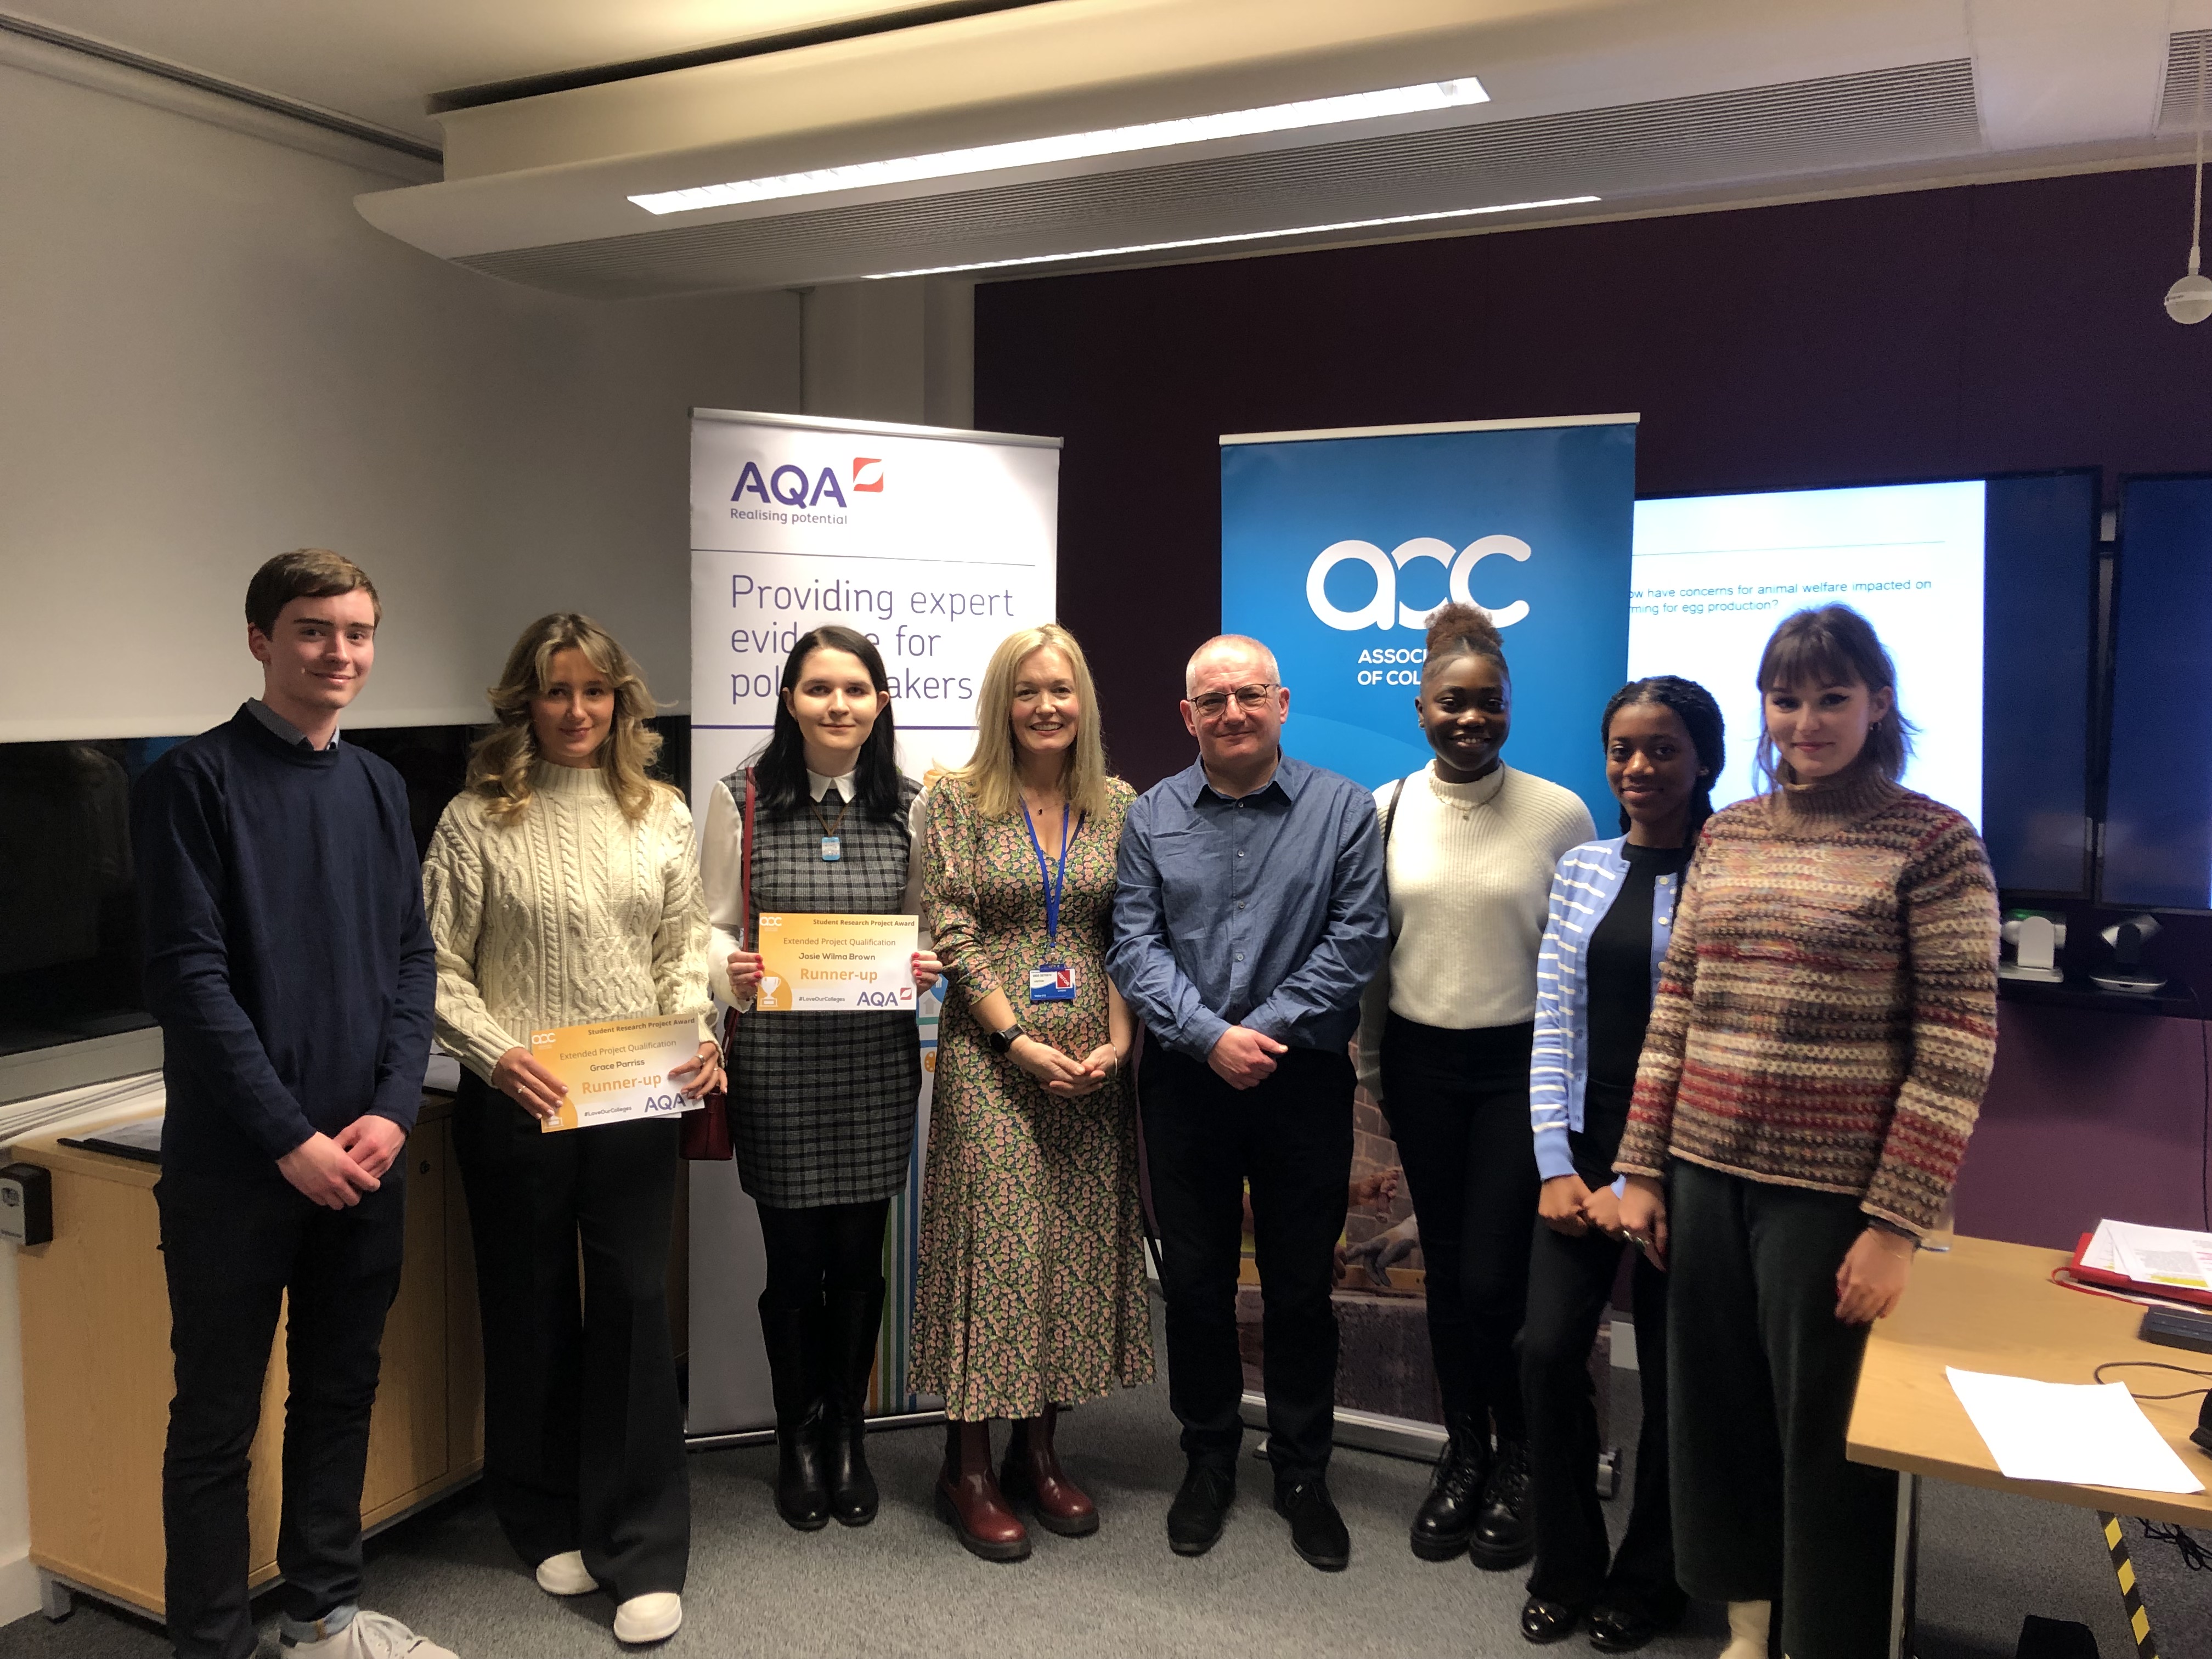 AQA’s Head of Curriculum Portfolio, Jen Osler, and Senior Policy Manager, Eddie Playfair, from the Association of Colleges with some shortlisted EPQ students at the event.